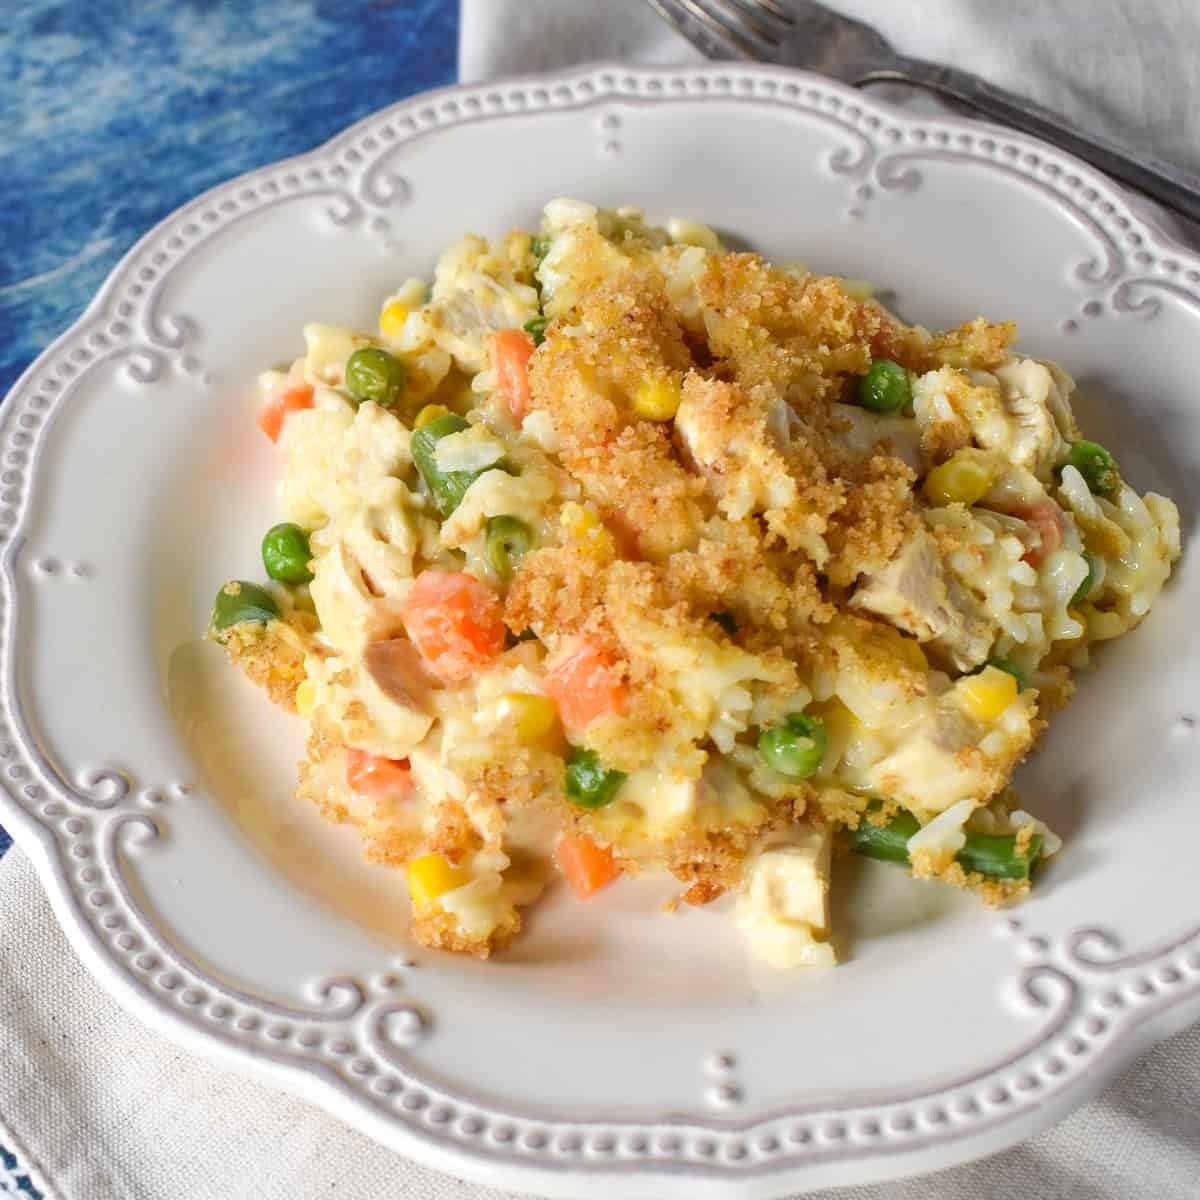 Creamy Chicken and Rice Casserole - Cook2eatwell